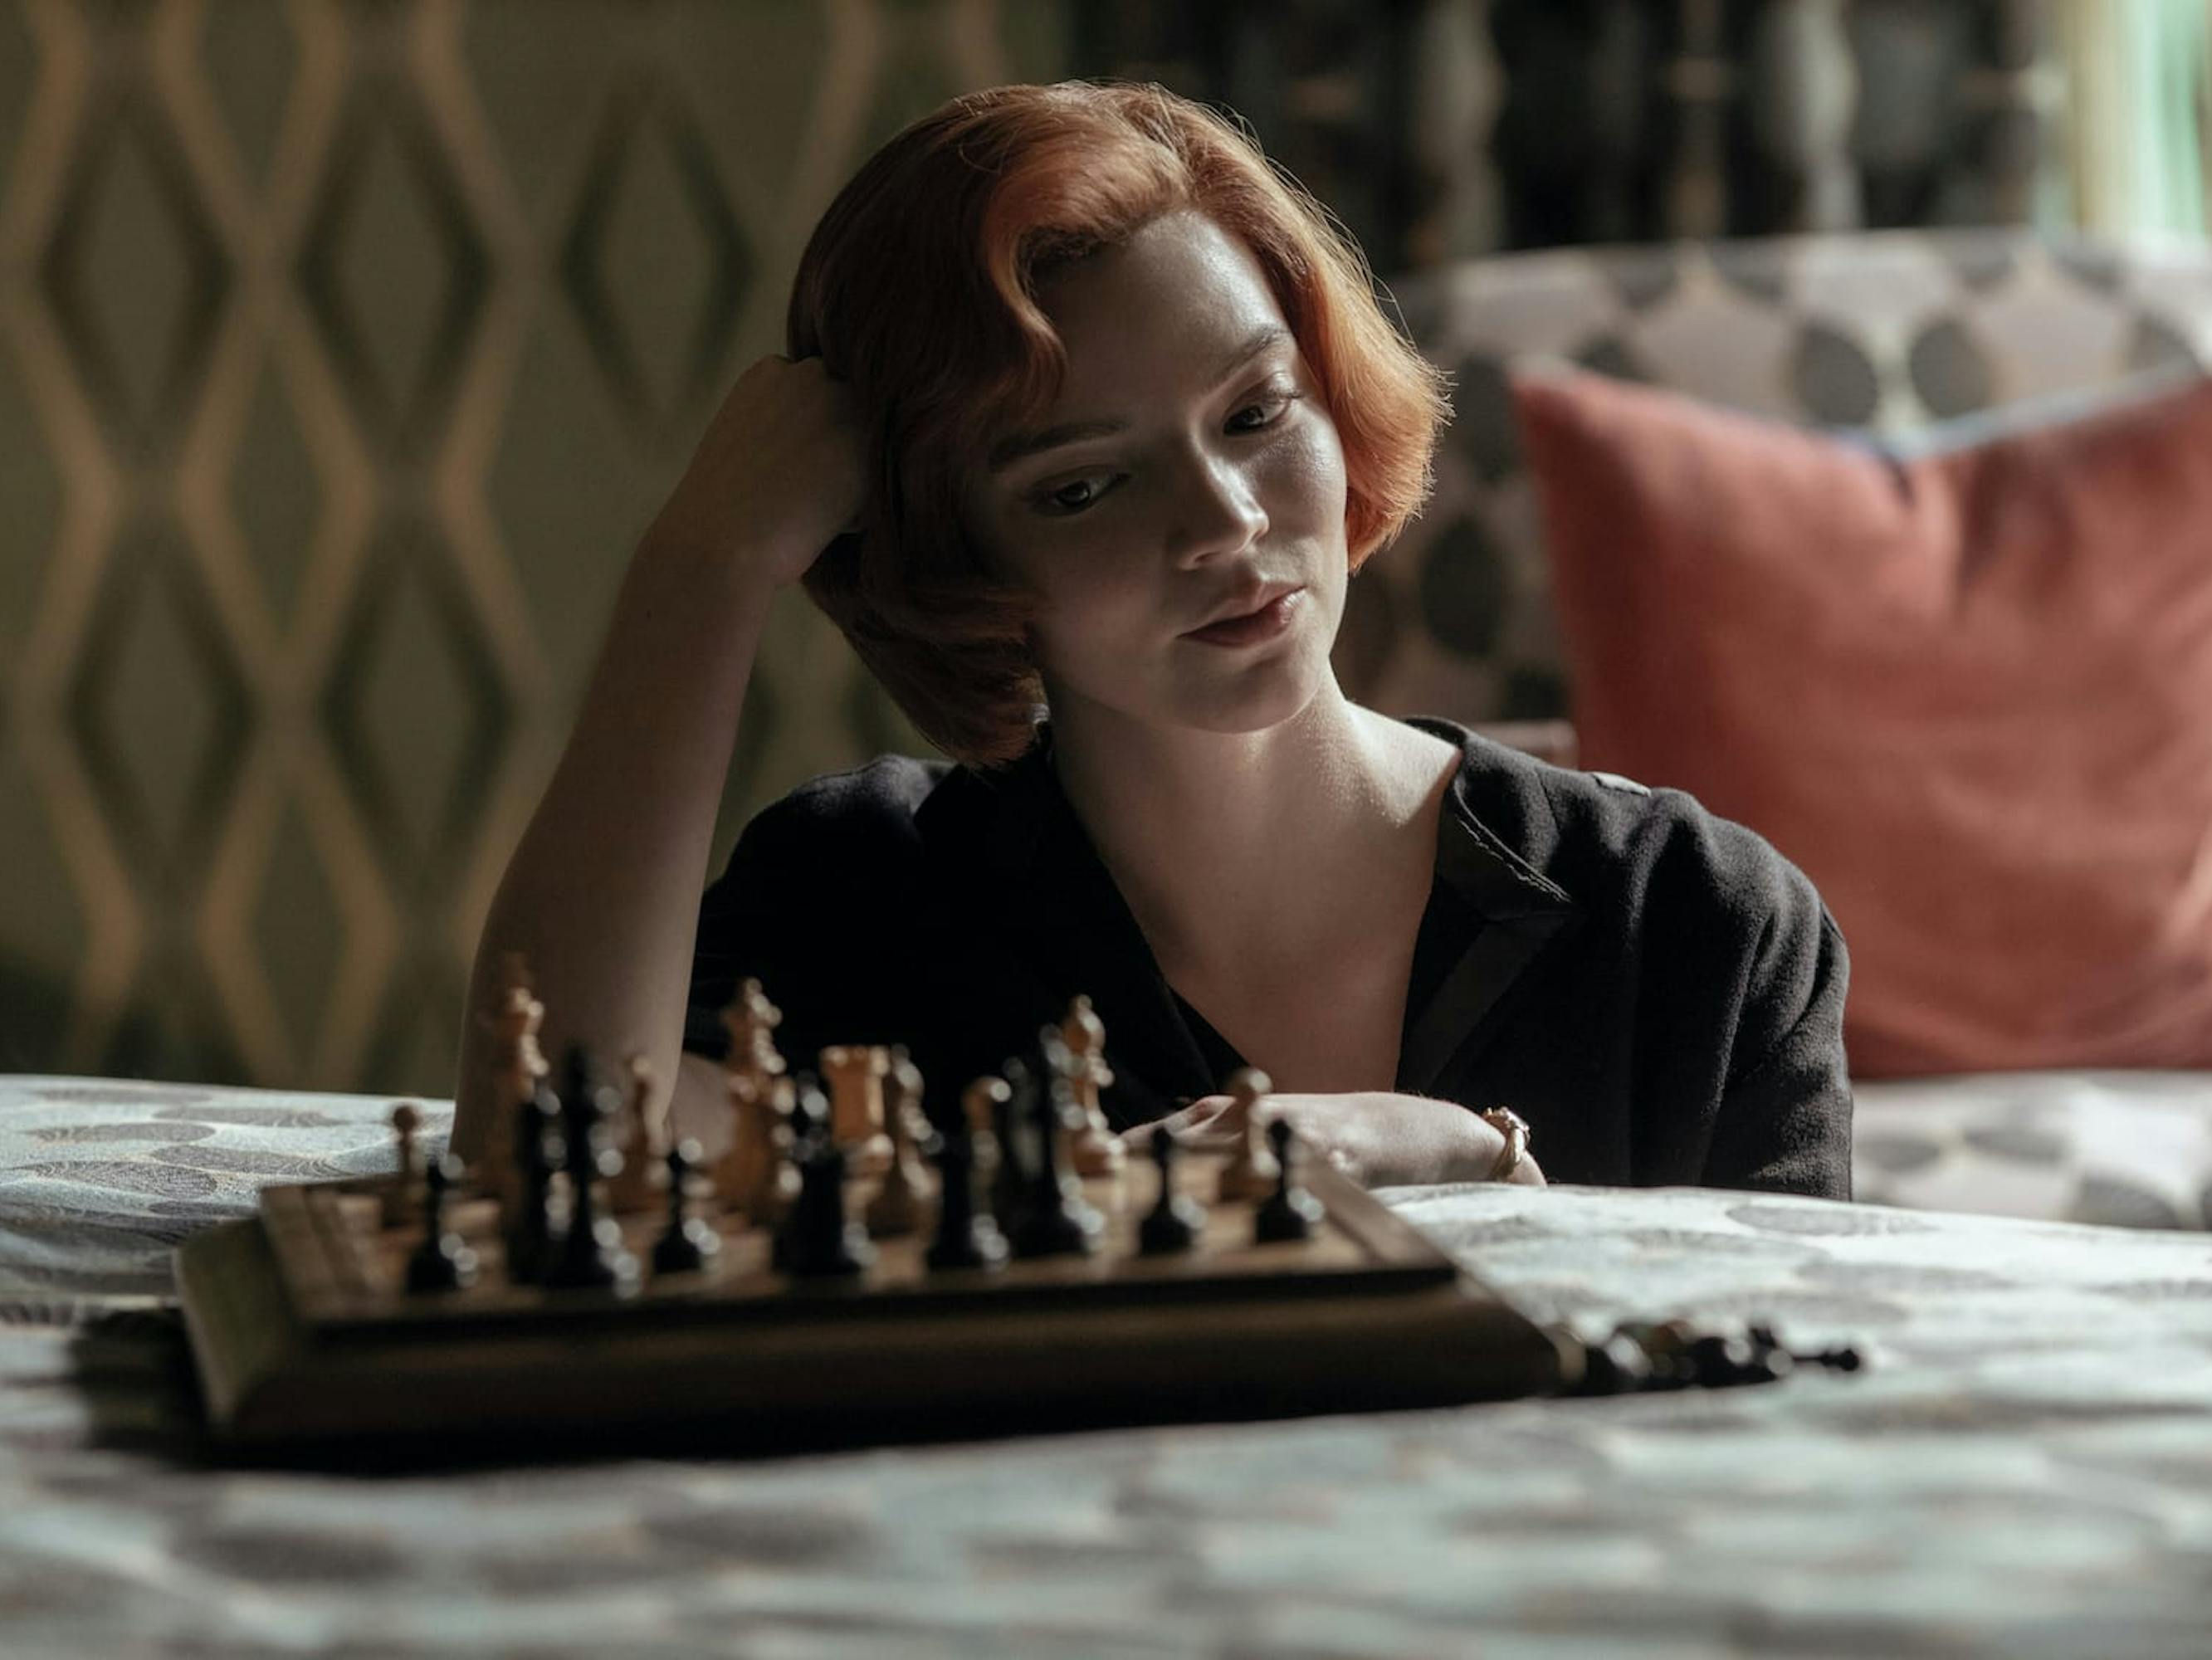 Beth Harmon plays chess by herself on a bed. Her red bob is illuminated by the light coming from a window and she looks focused.